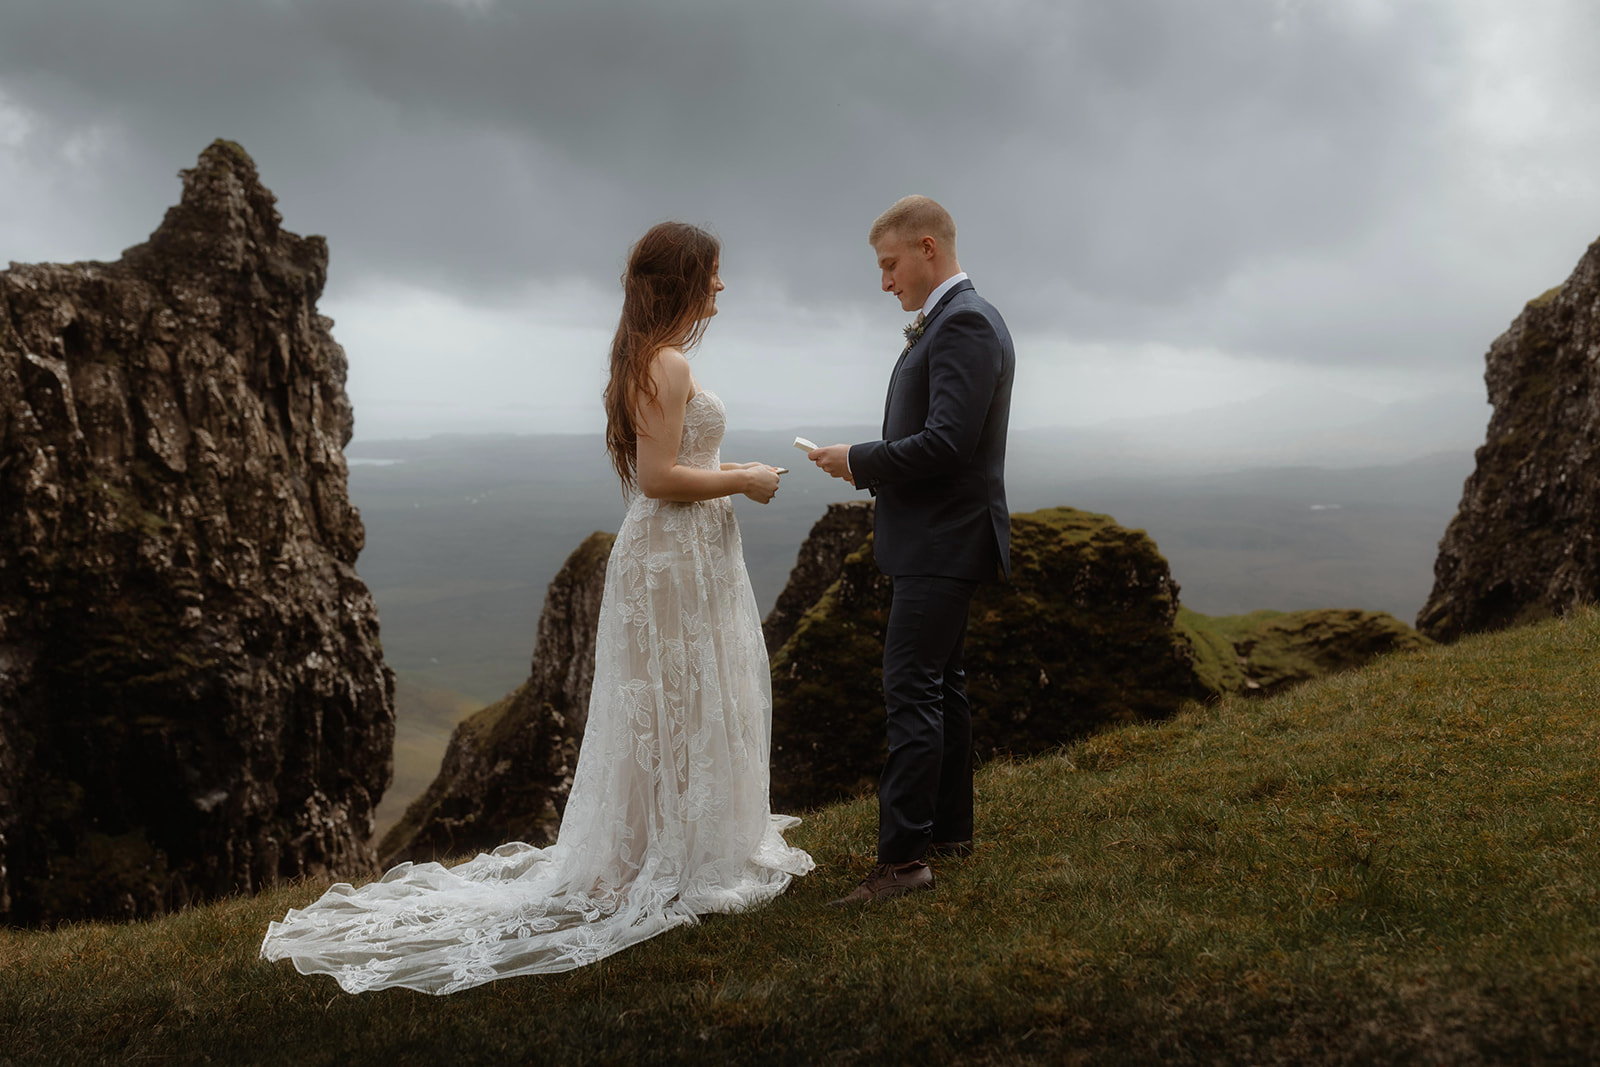 Experience the enchantment of Emma and Matthew's elopement ceremony set against the breathtaking Quiraing, Isle of Skye.